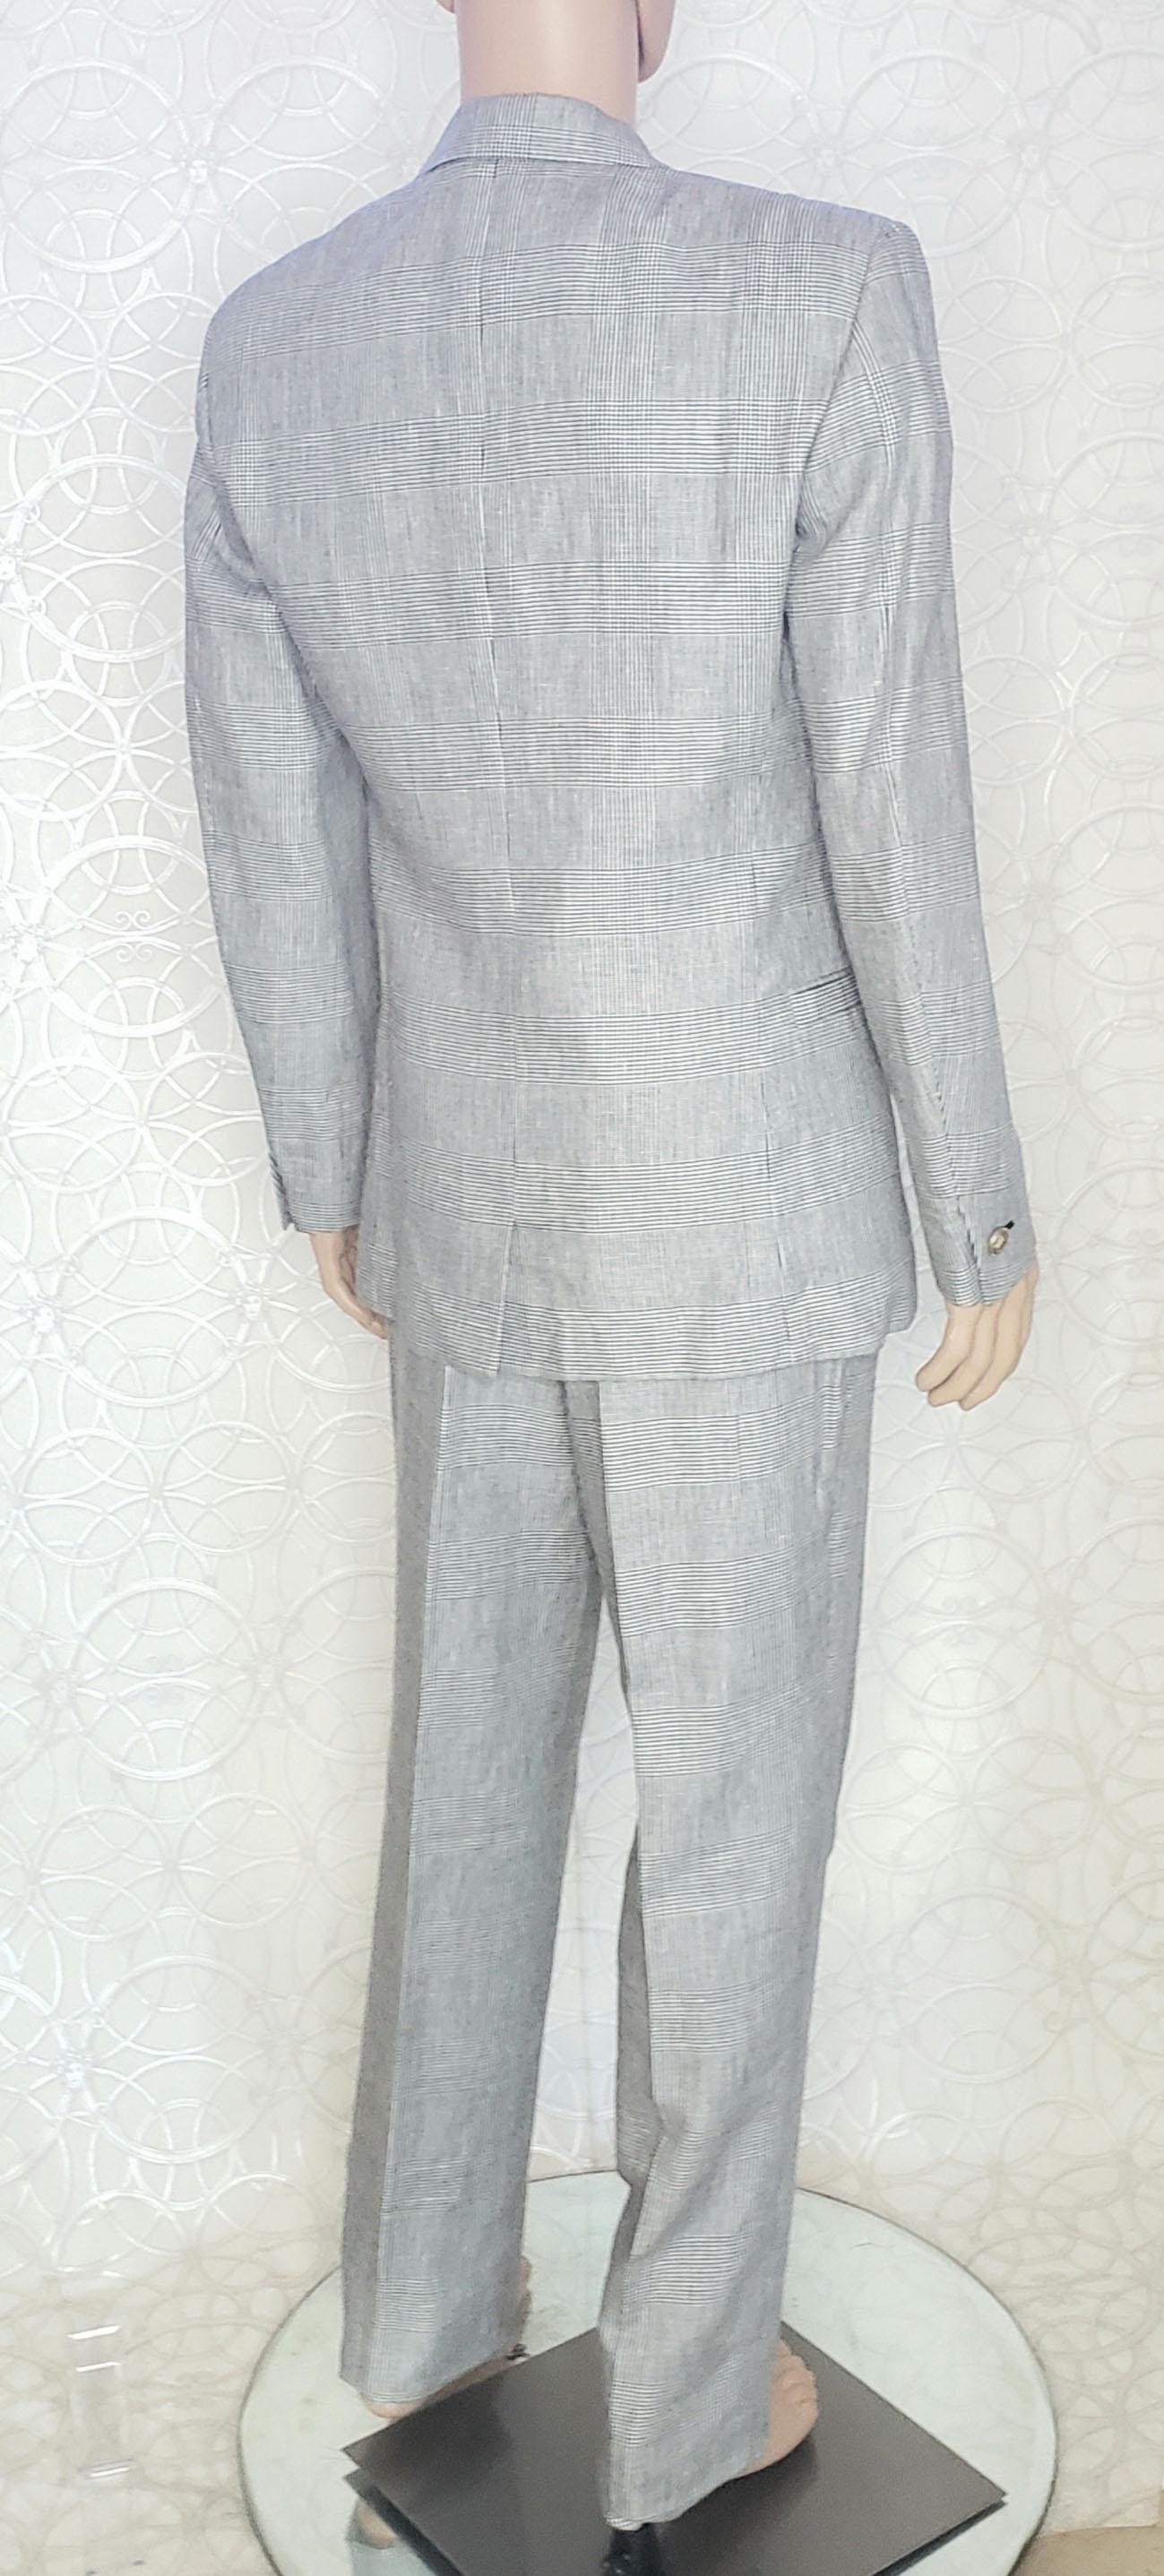 VERSACE S/S 2012 look # 2 BRAND NEW GRAY SUIT 48 - 38 (M) For Sale 2